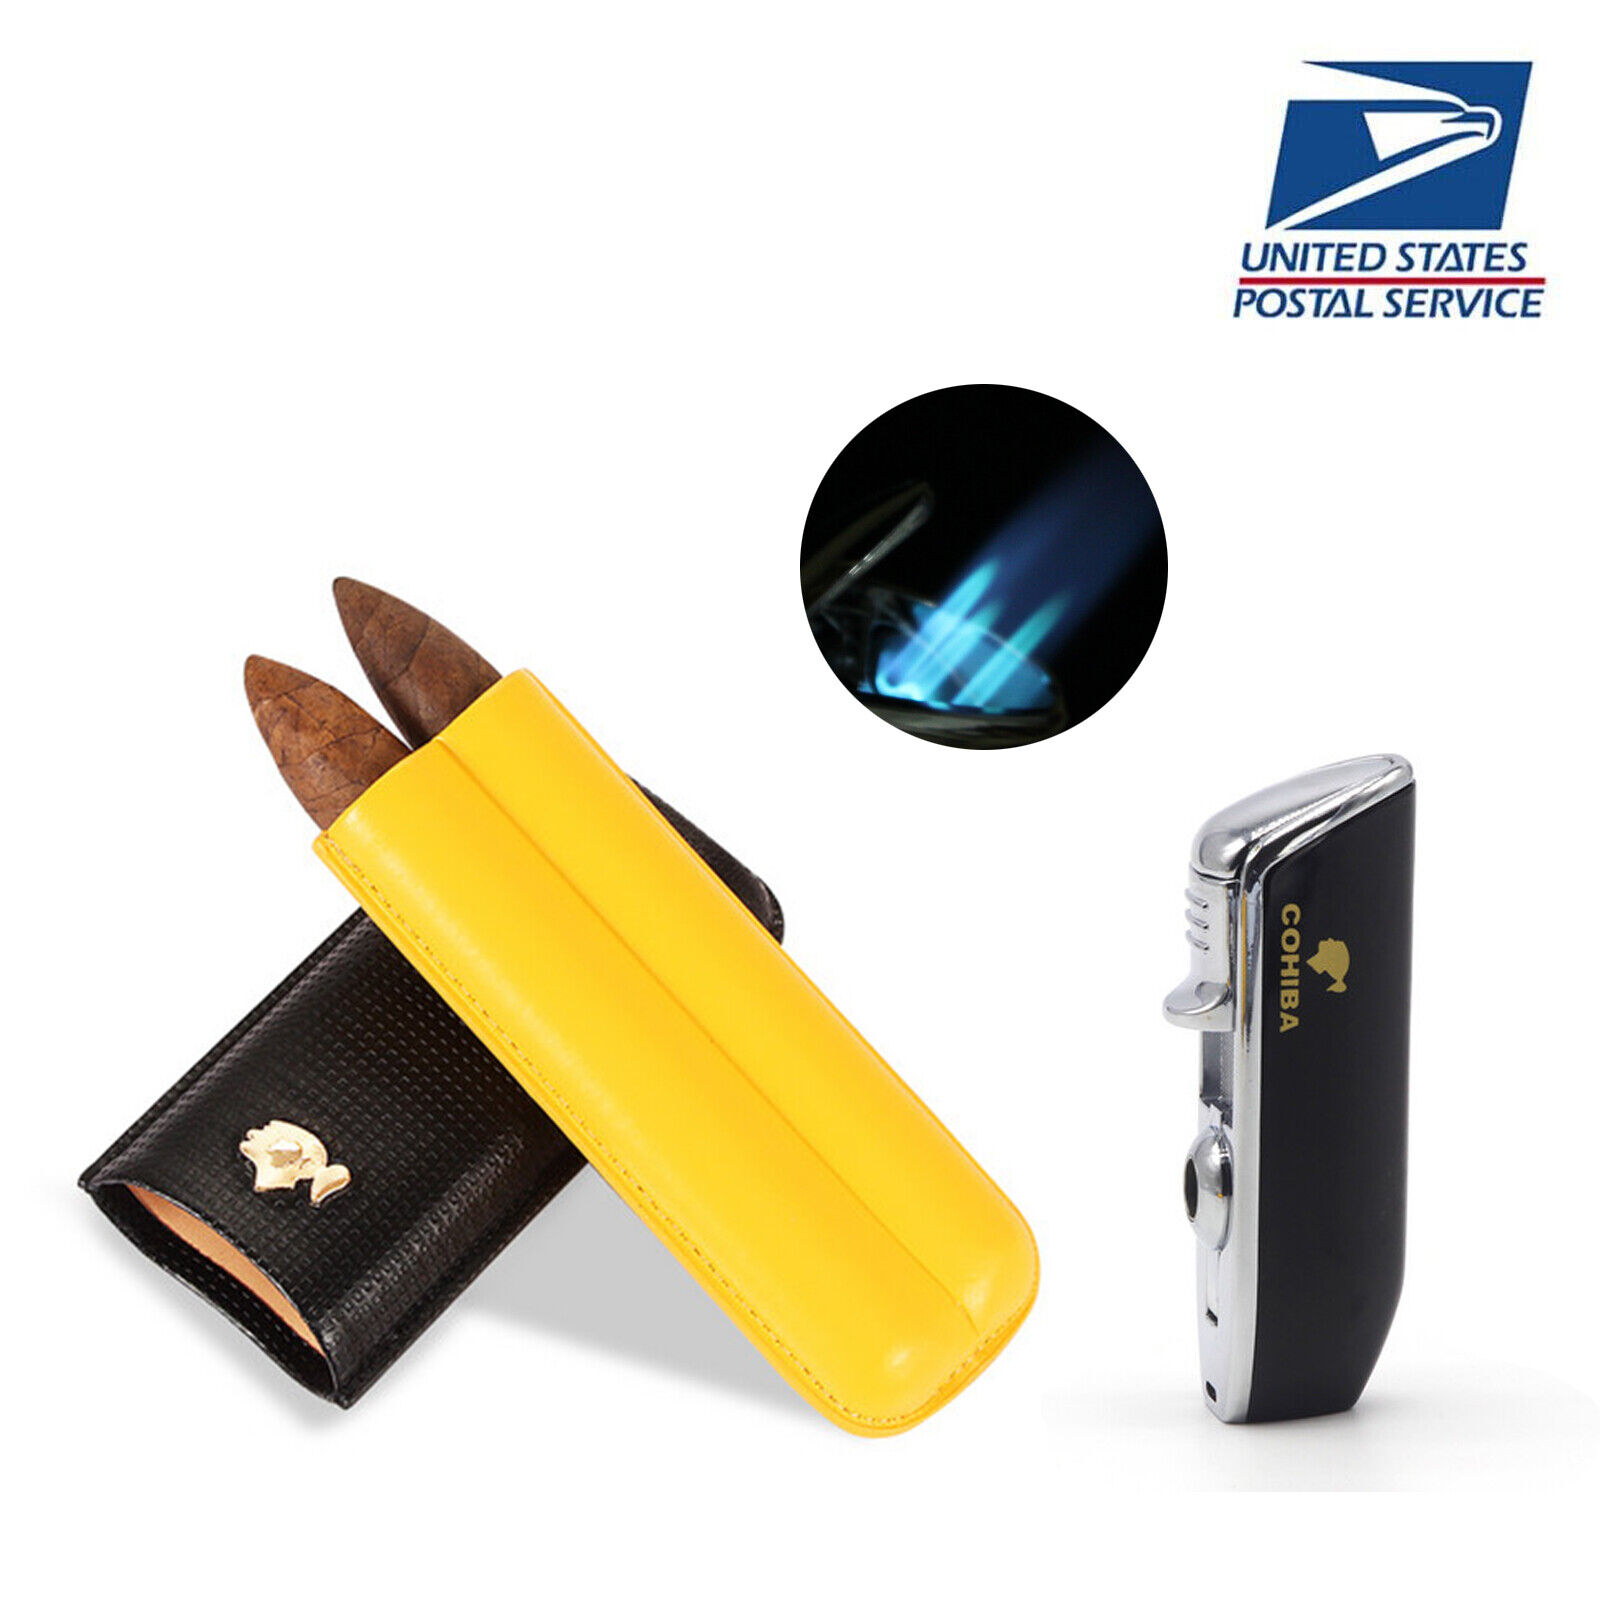 Cohiba Travel Leather Cigar Case and Cigar Lighter W/ Hole Punch For Men 3 Jet